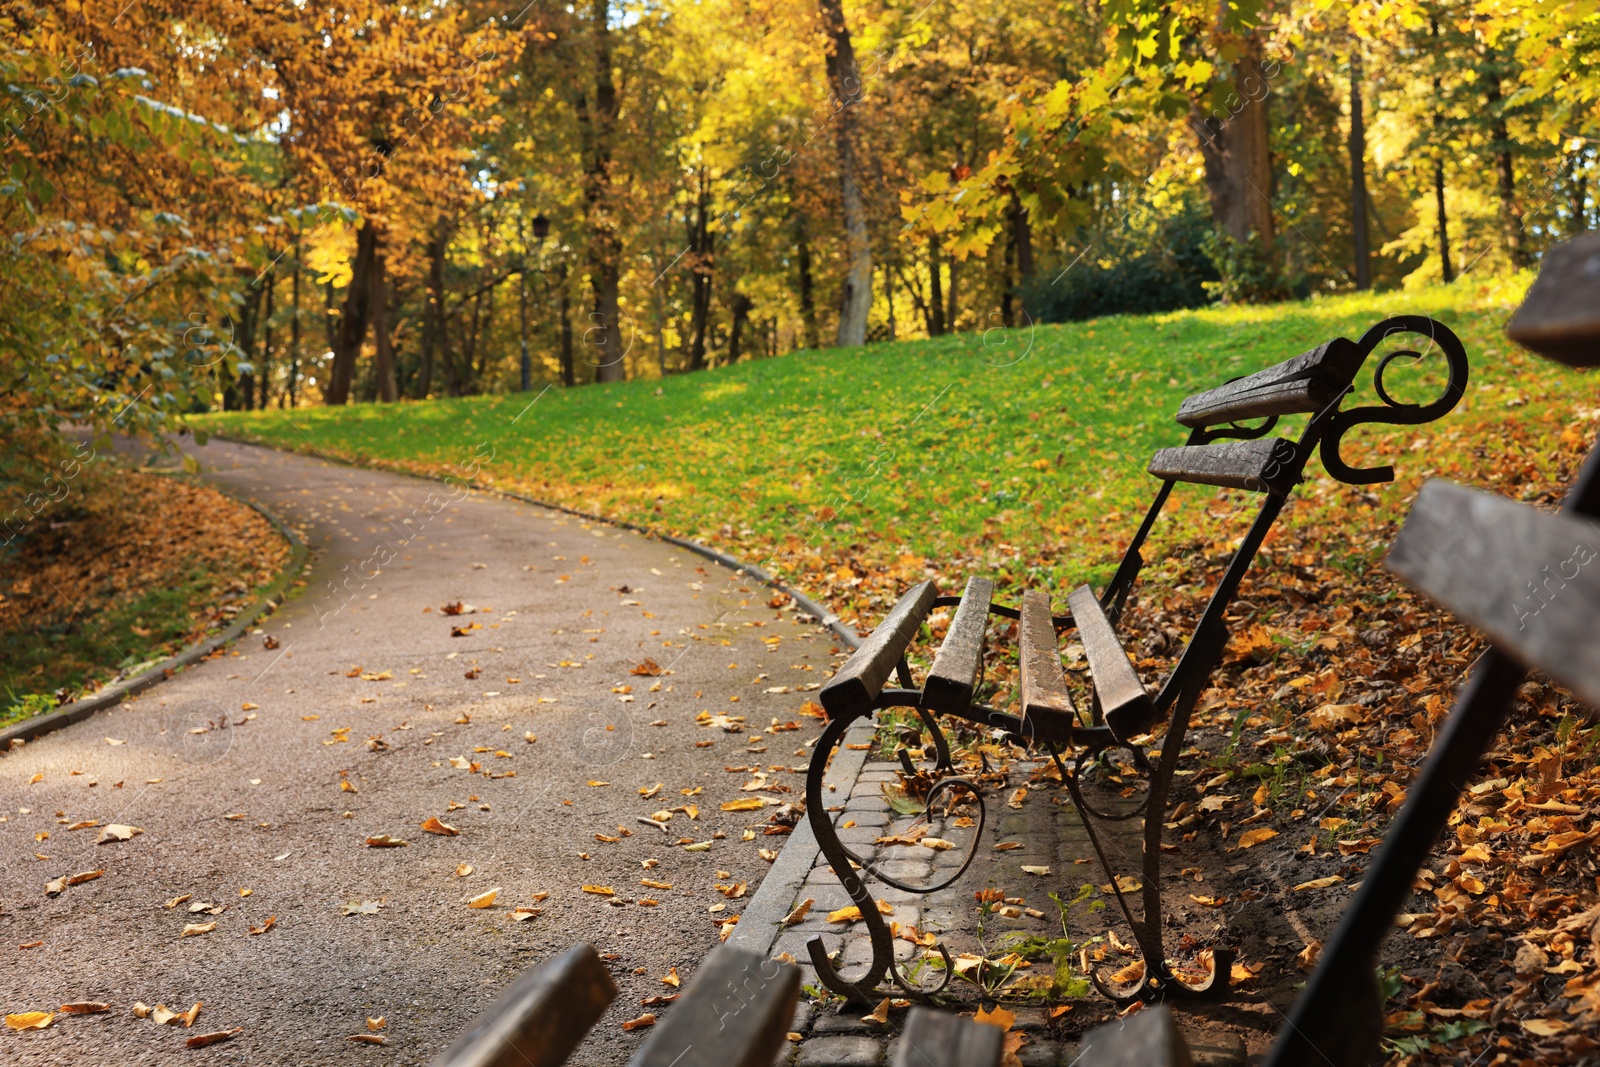 Photo of Wooden benches, pathway, fallen leaves and trees in beautiful park on autumn day